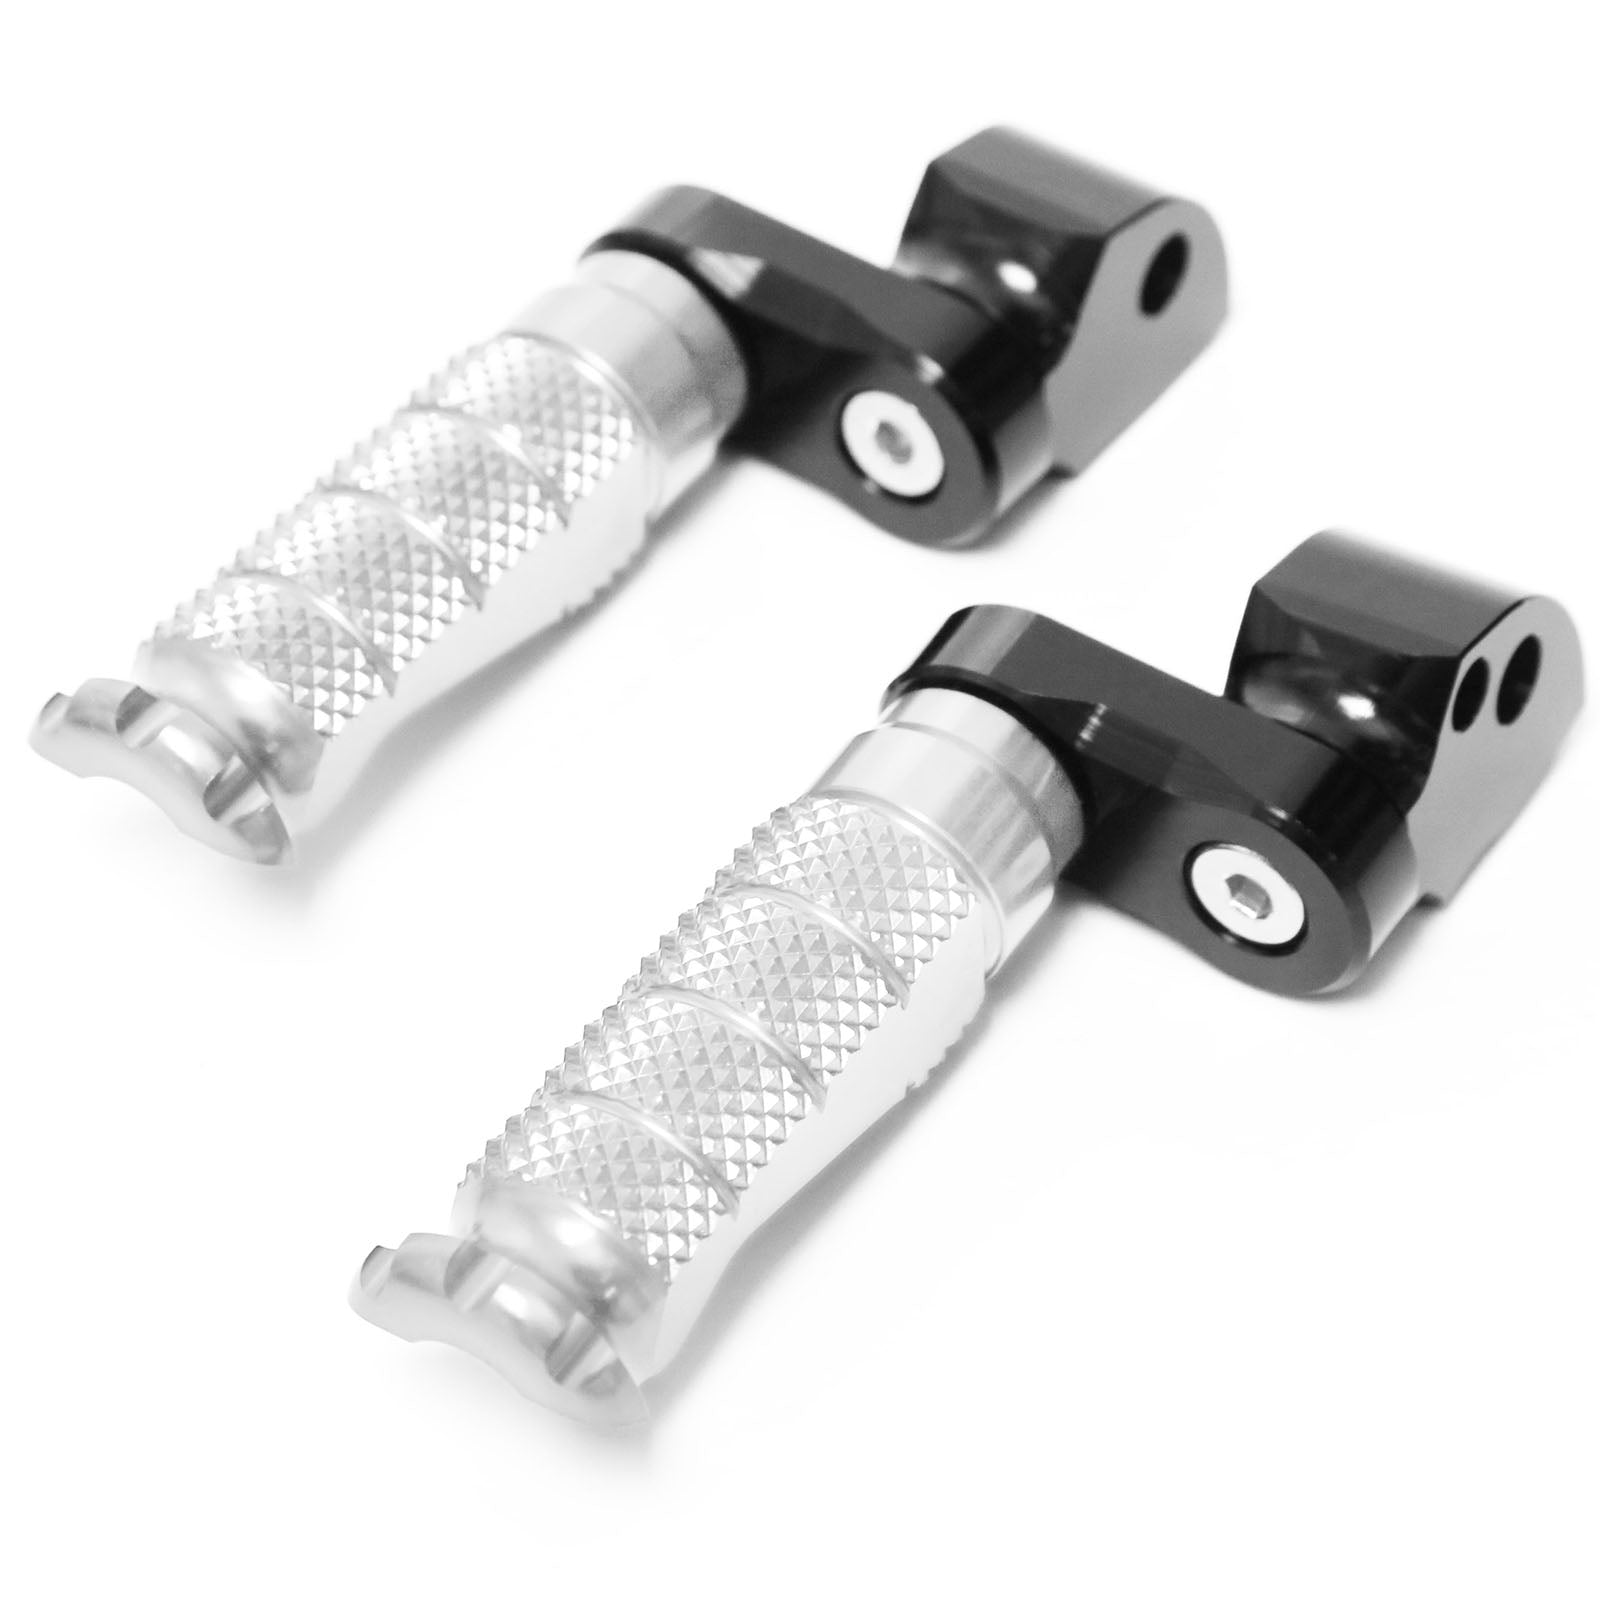 Fits MV Agusta Brutale 675 800 F4 25mm Extension Rear R-FIGHT Silver Foot Pegs